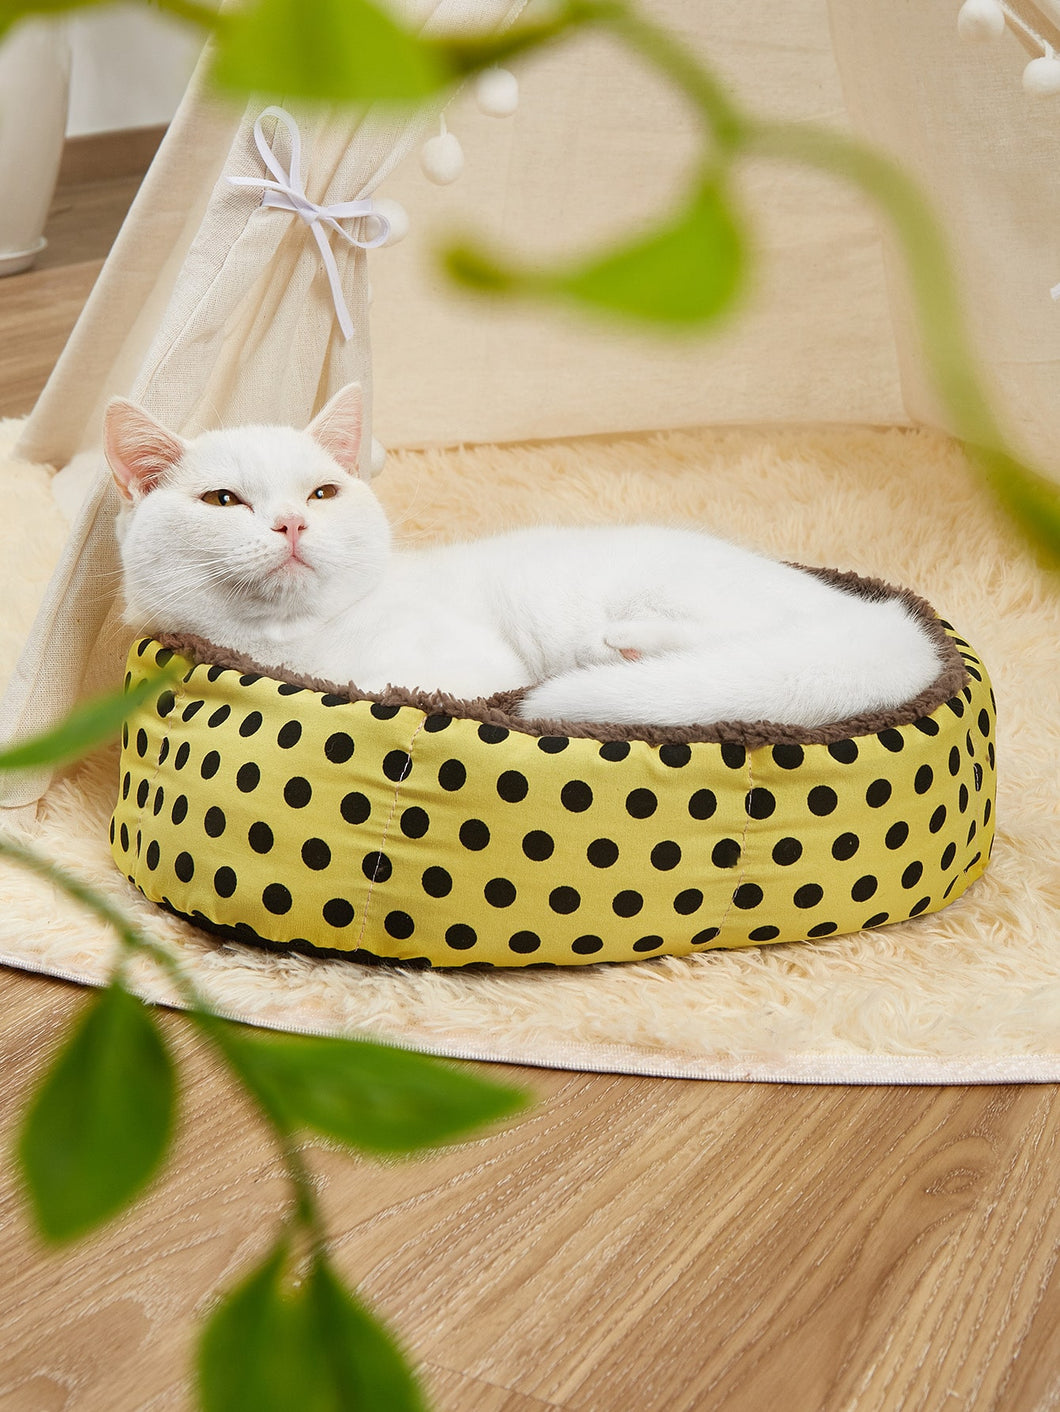 'Polka Dot Plush Octagon Pet Bed' Make your friend pet feel comfortable on this cute and soft pet bed! Colour: Yellow  Collections: Luxury Pattern Type: Polka Dot Composition: 50% Cotton, 50% Polyester Material: Cotton Applicable Pet: Cat/Dog